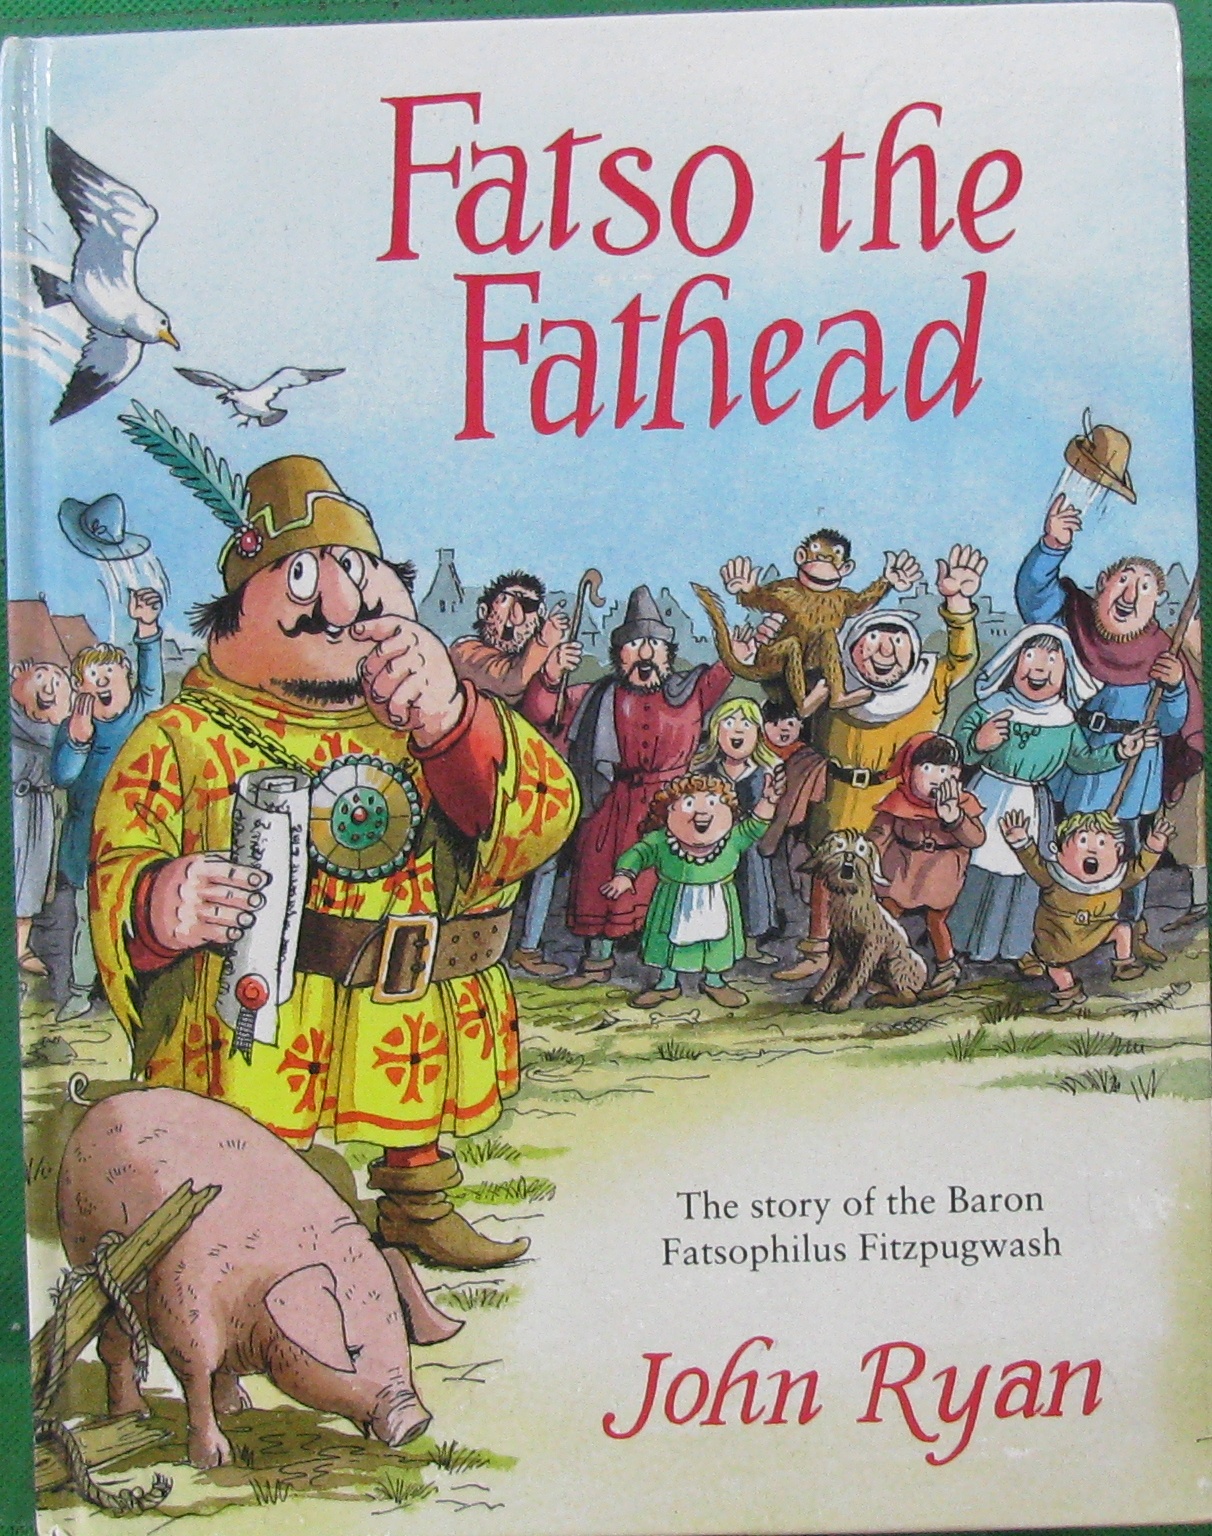 fatso the fathead: the story of the baron fatsophilus fitz